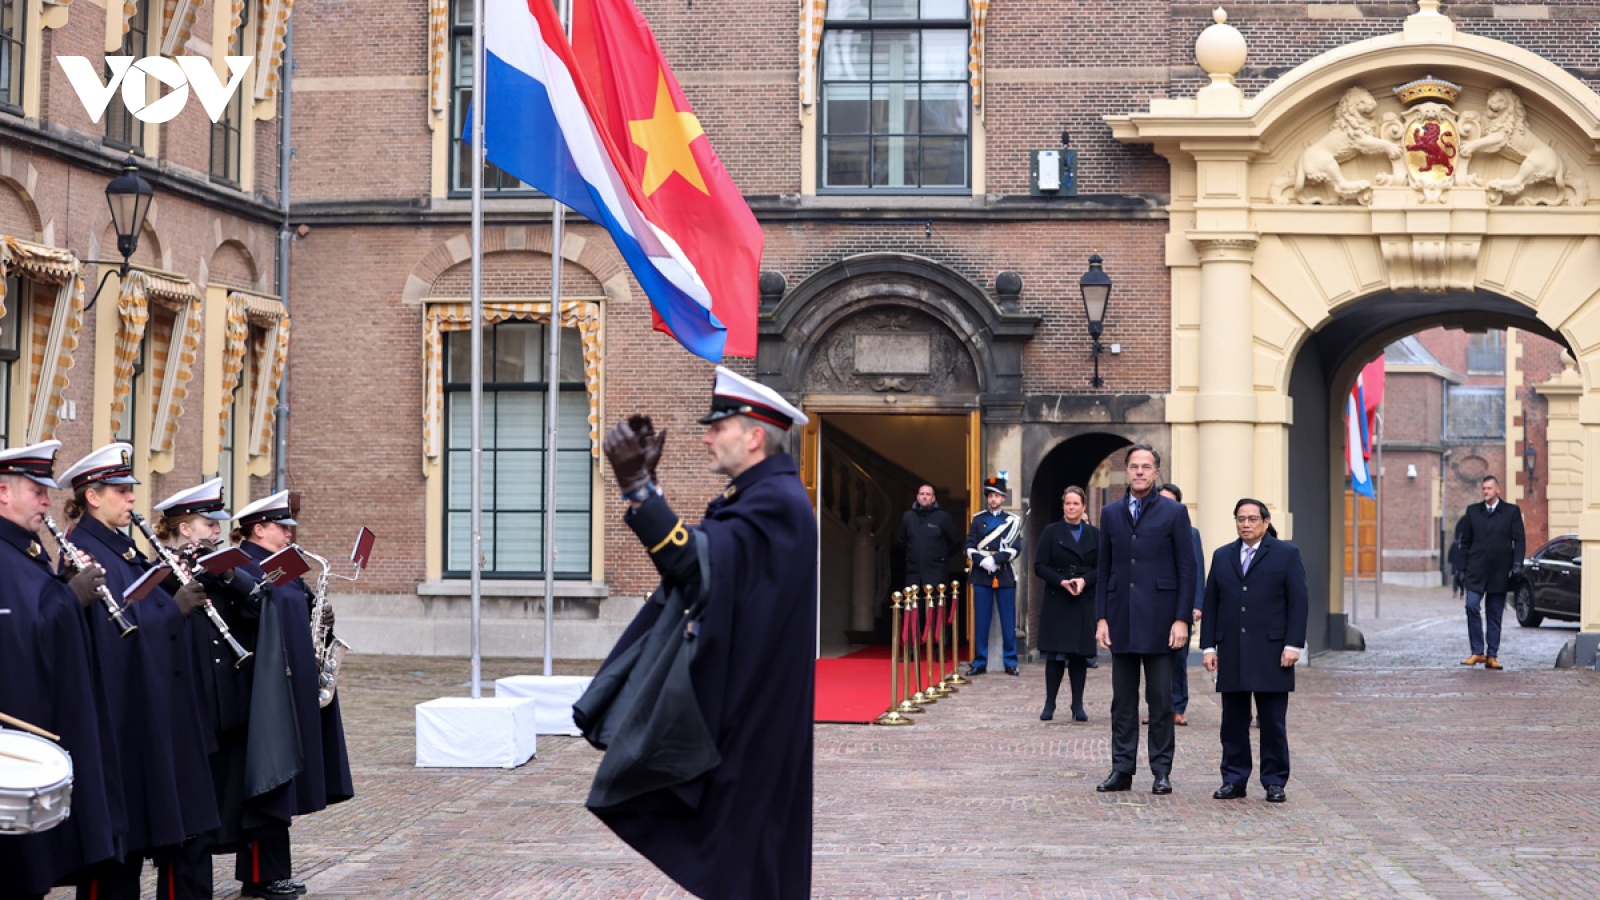 PM Pham Minh Chinh welcomed in The Hague on Netherlands visit